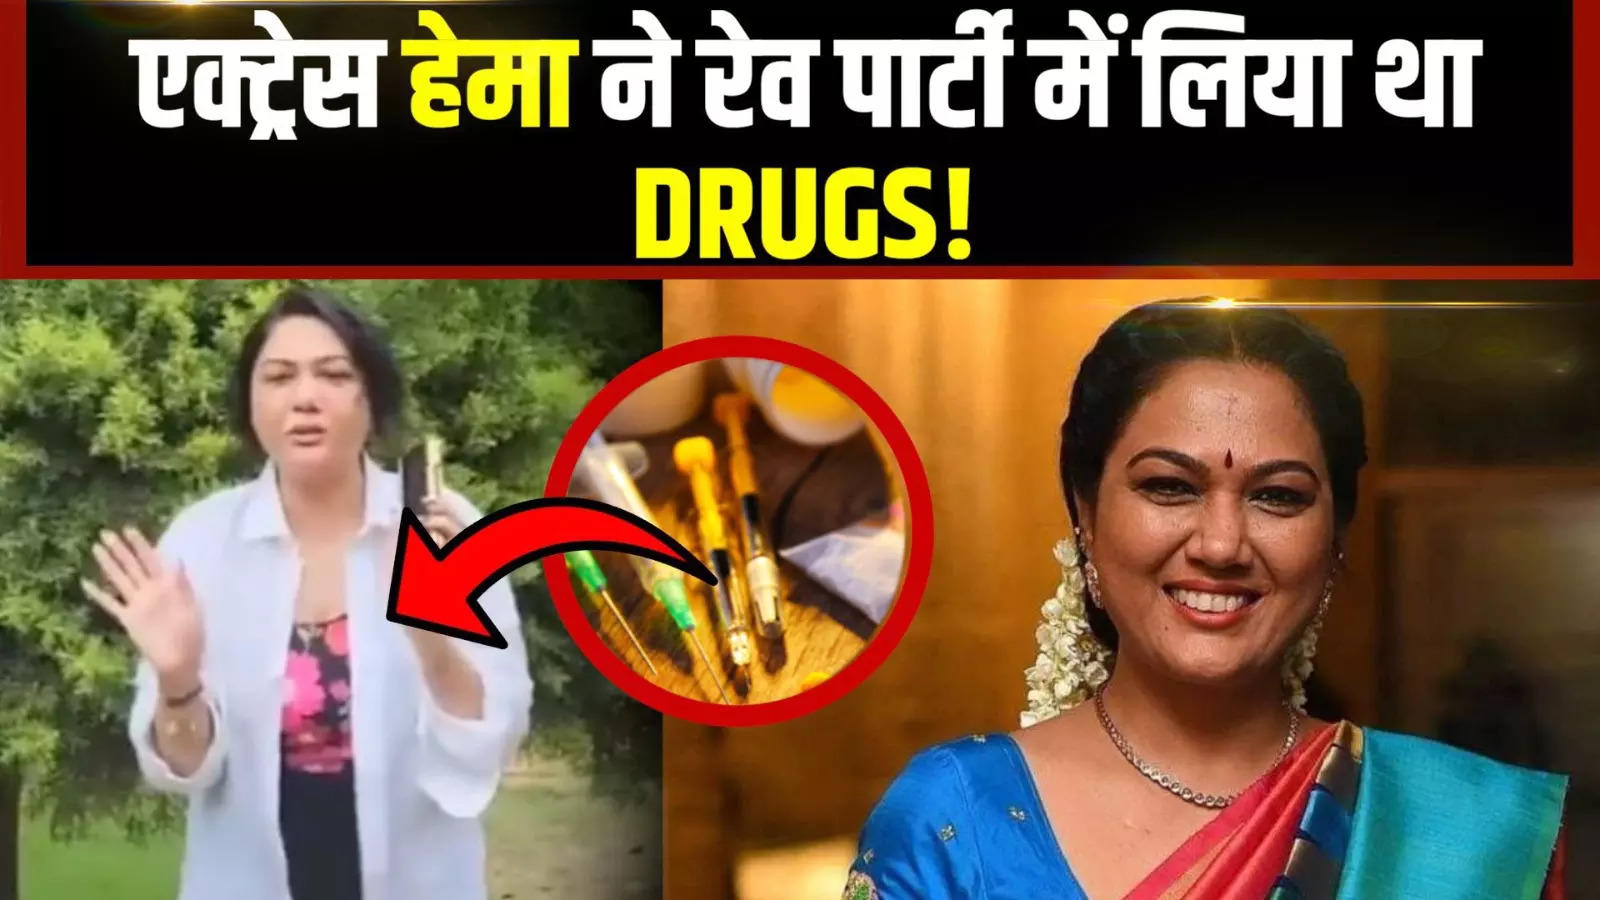 Actress Hema had taken drugs at a rave party, police claim – the actress has been found positive